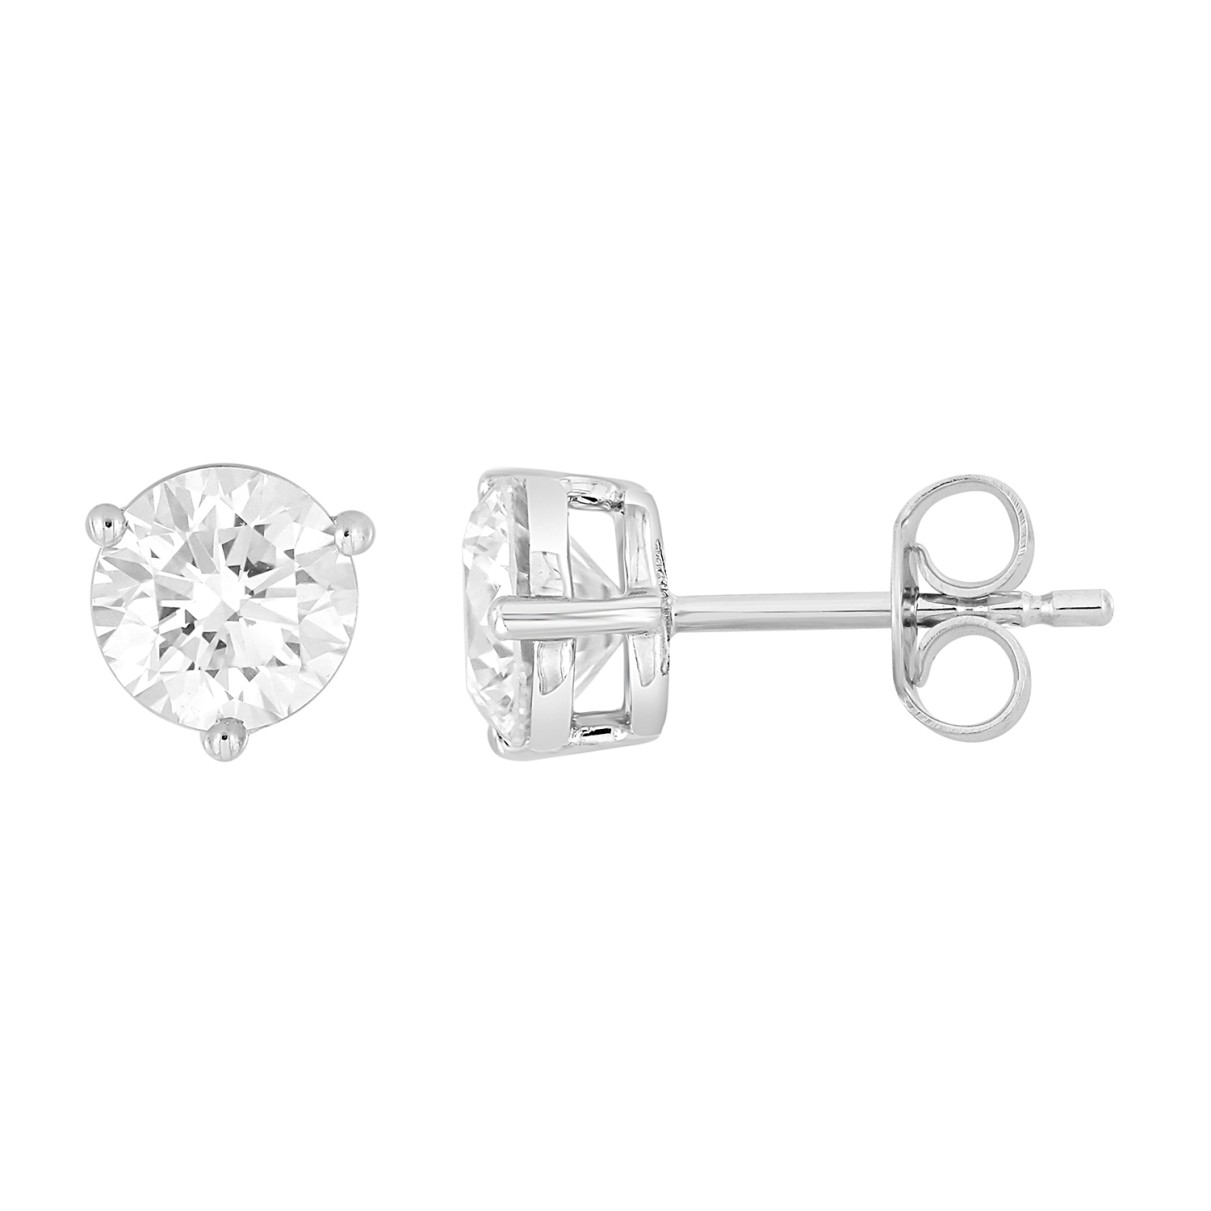 14K WHITE GOLD 3CT ROUND DIAMOND LADIES SOLITAIRE EARRINGS 